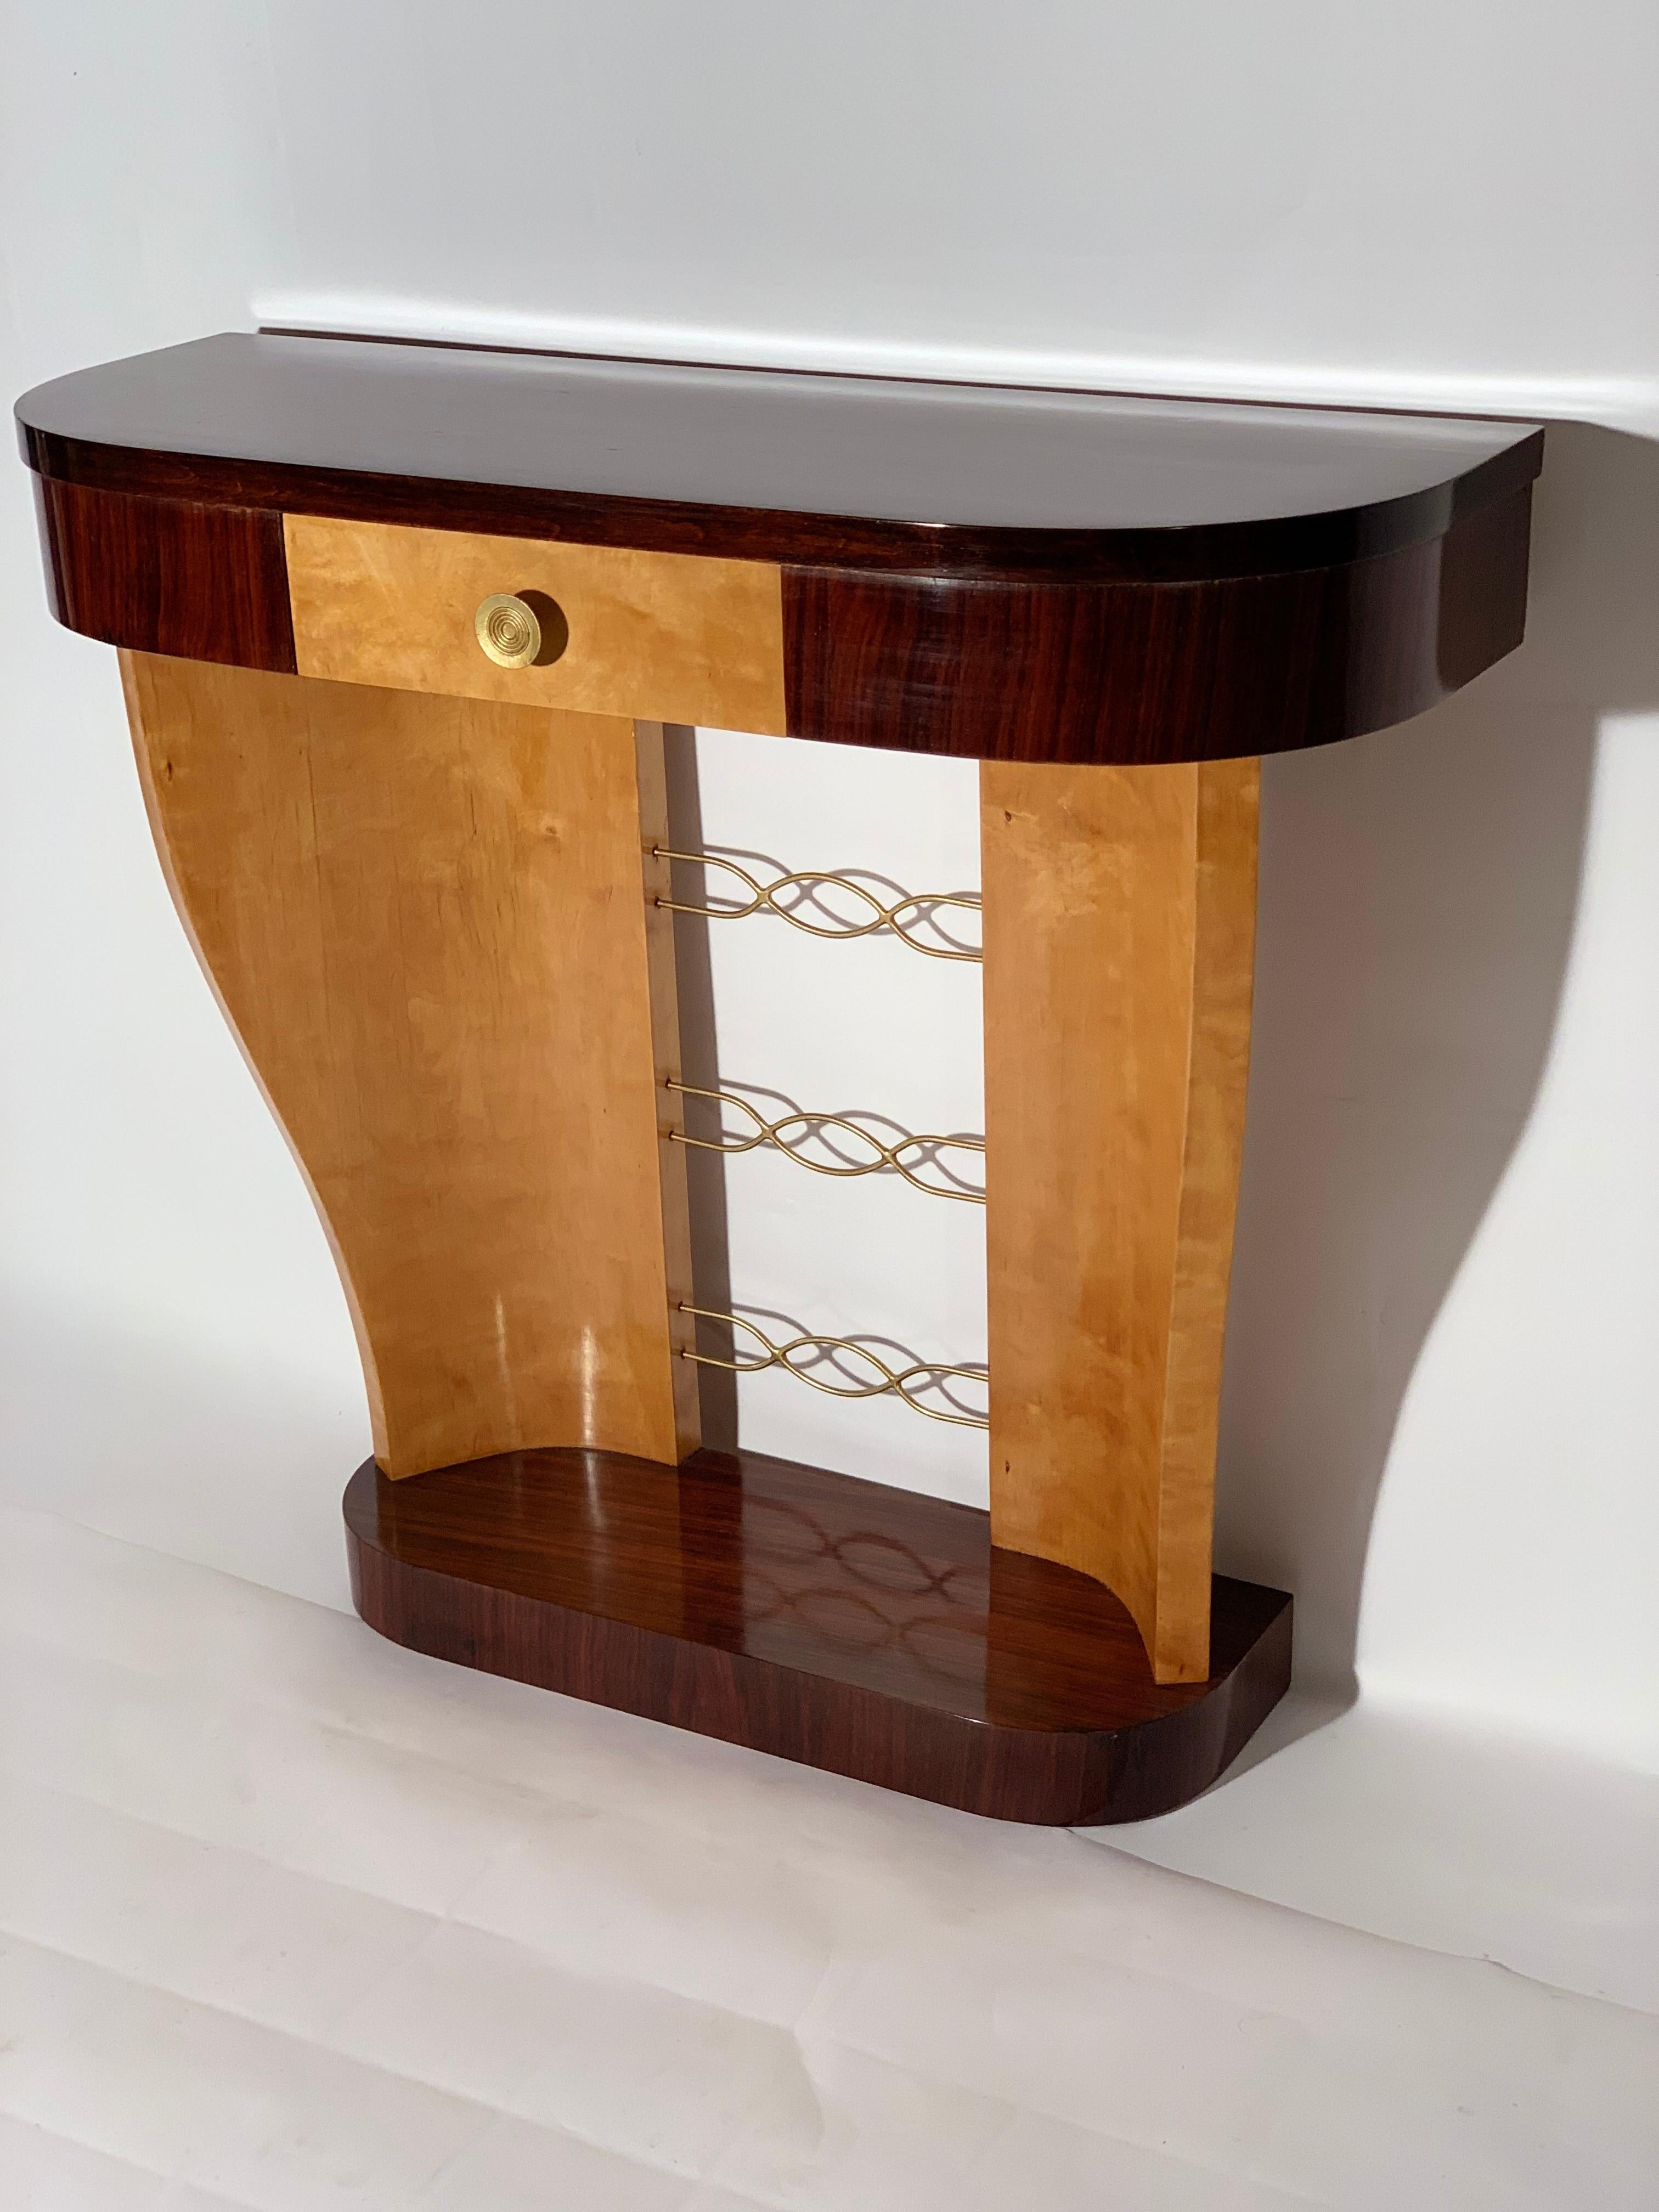 Italian Art Deco Consolle, bird yes maples wood and exotic precious wood that create a contrast between dark and light colors.
Base curved at the corners with overhanging two curved maple supports joined by a brass decoration, supporting the curved